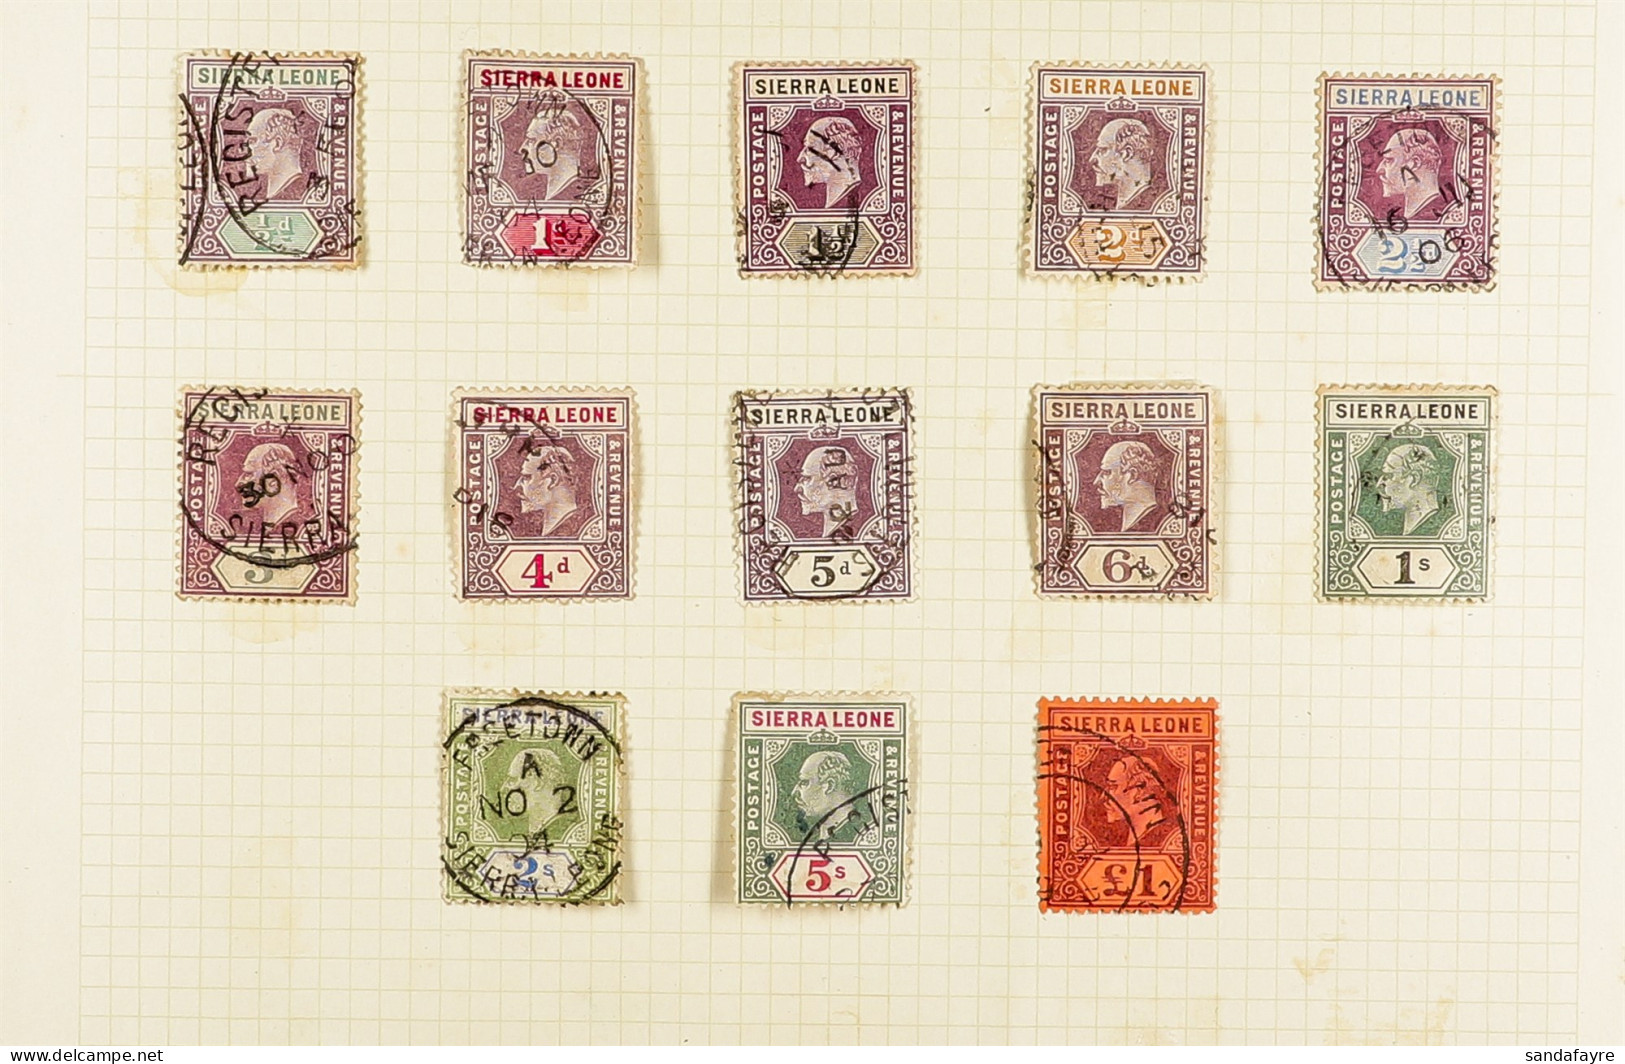 1903 - 1907 USED COLLECTION On Small Album Pages, Note 1903 Set, 1904-05 Set (no 5s), 1907-12 Set, Etc (42 Stamps) - Sierra Leone (...-1960)